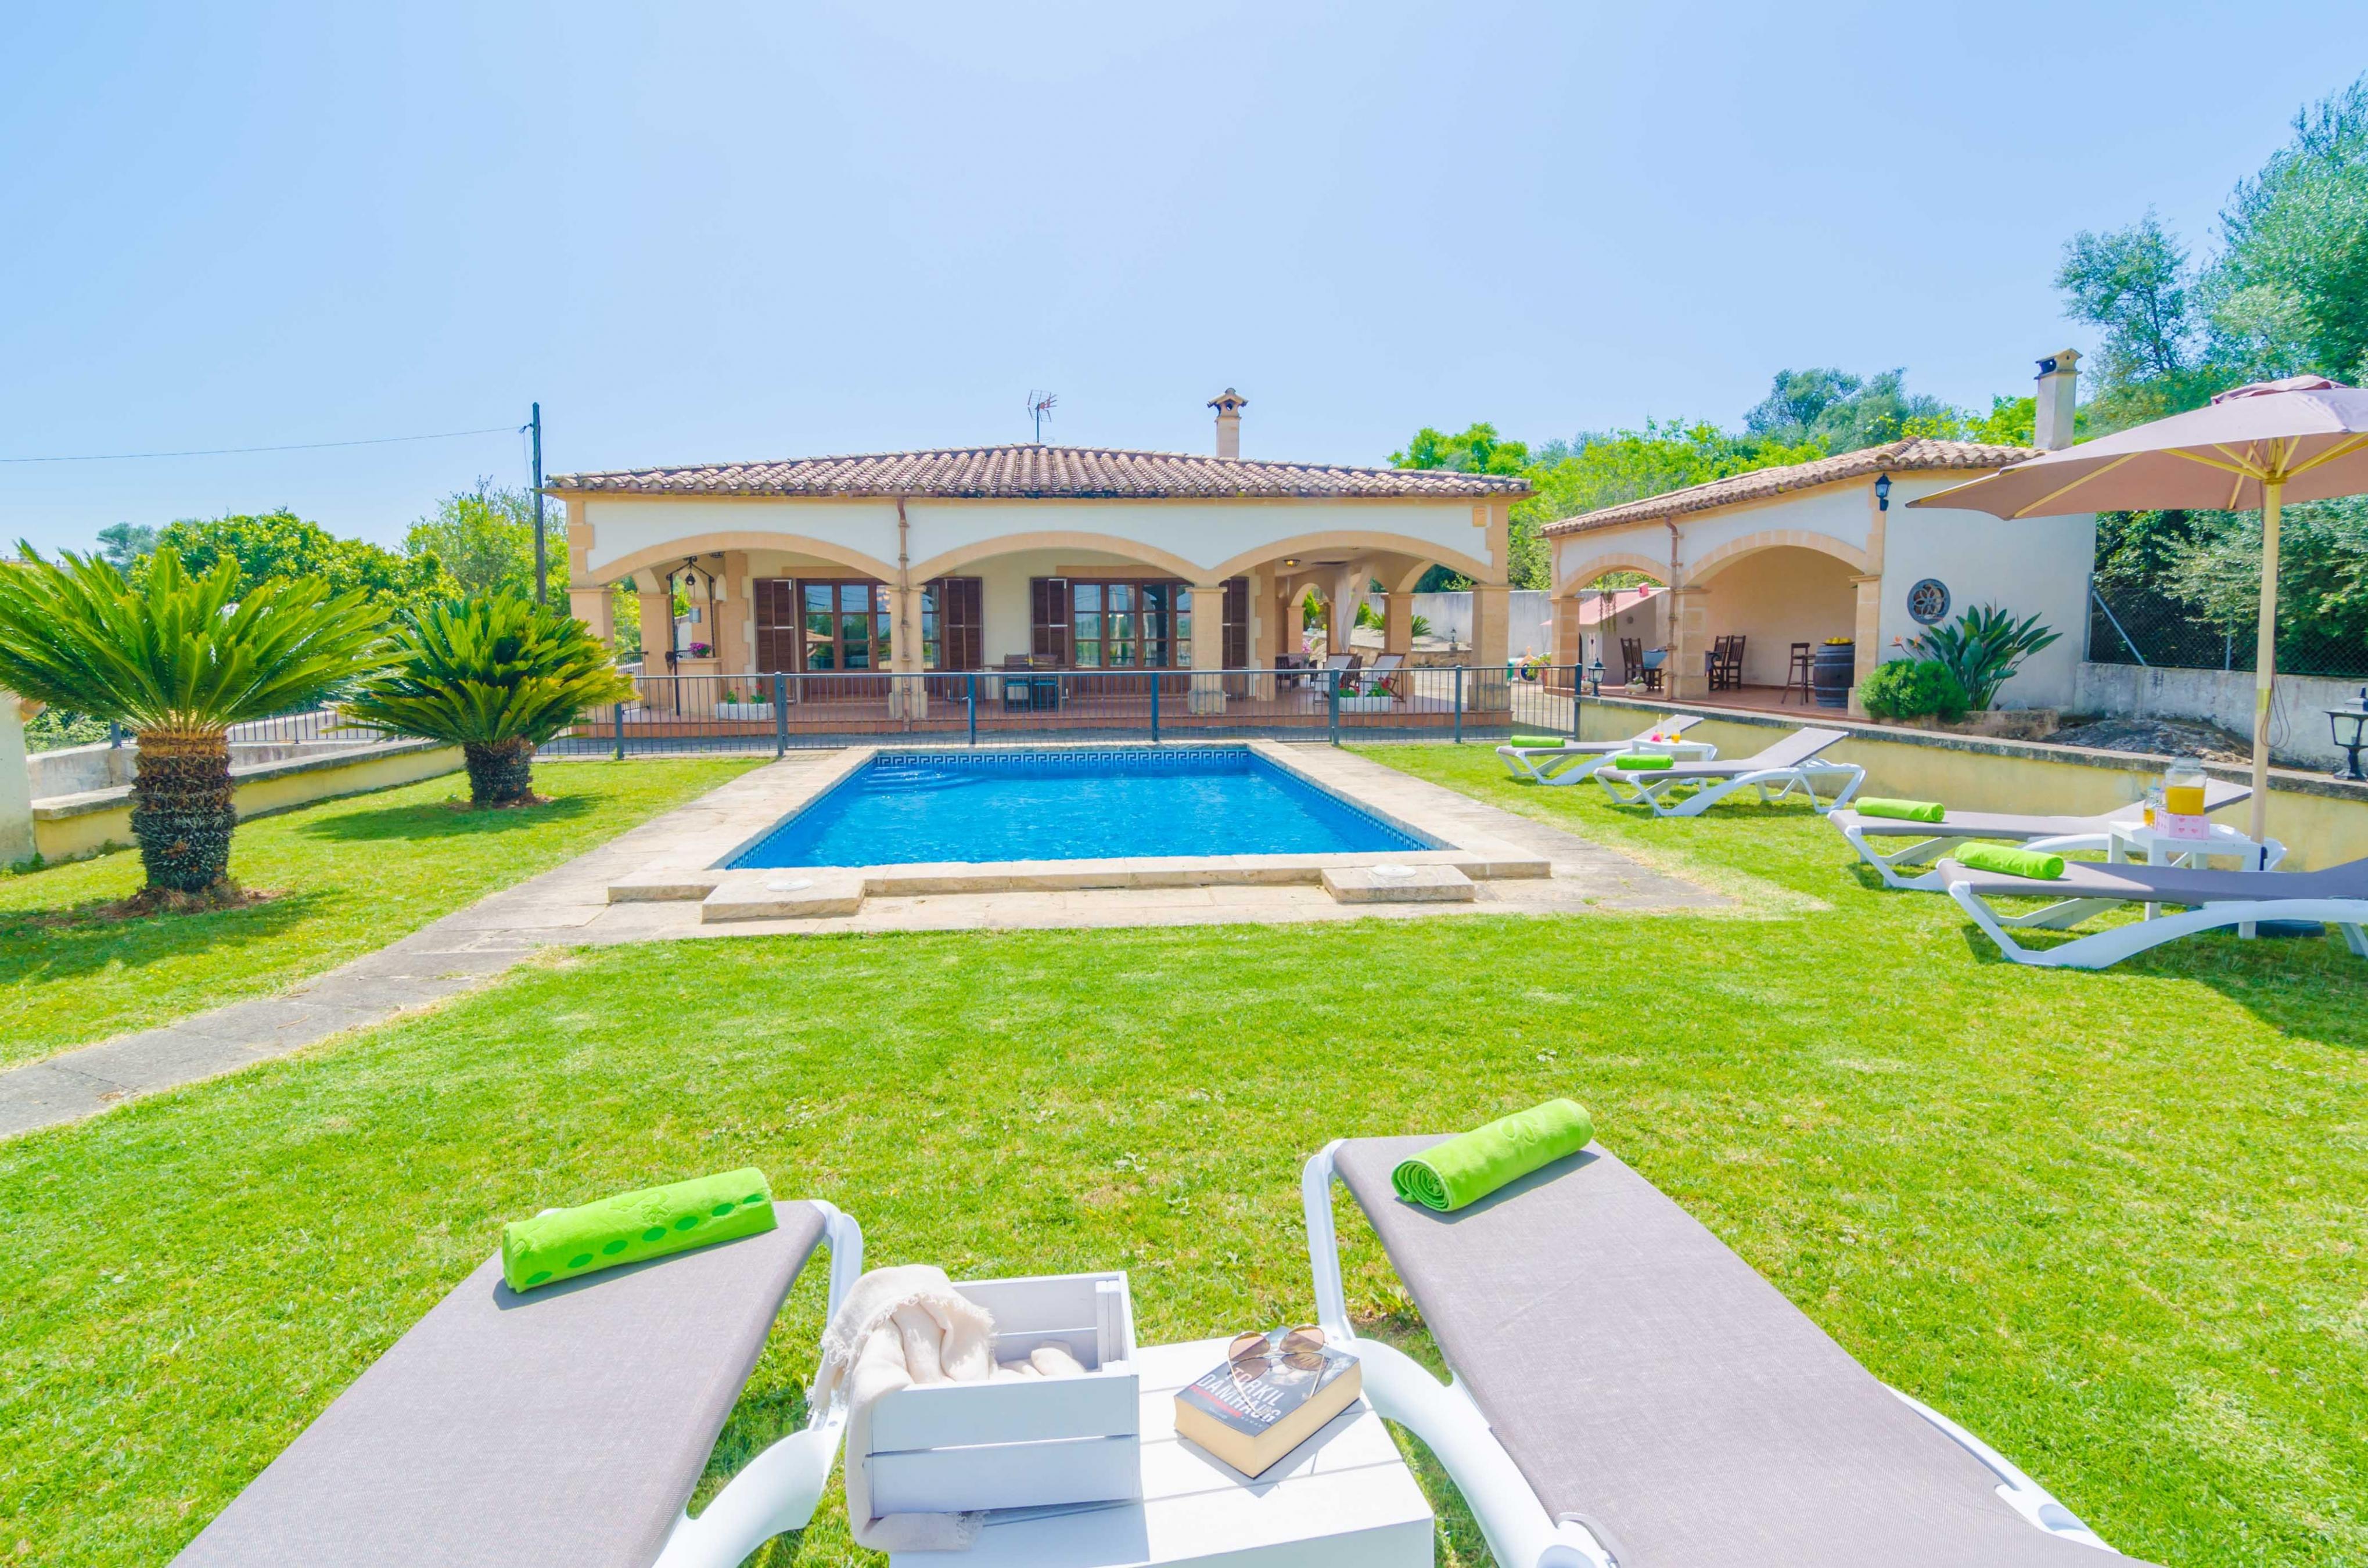 Property Image 2 - SES COVETES - Villa with private pool in Petra. Free WiFi